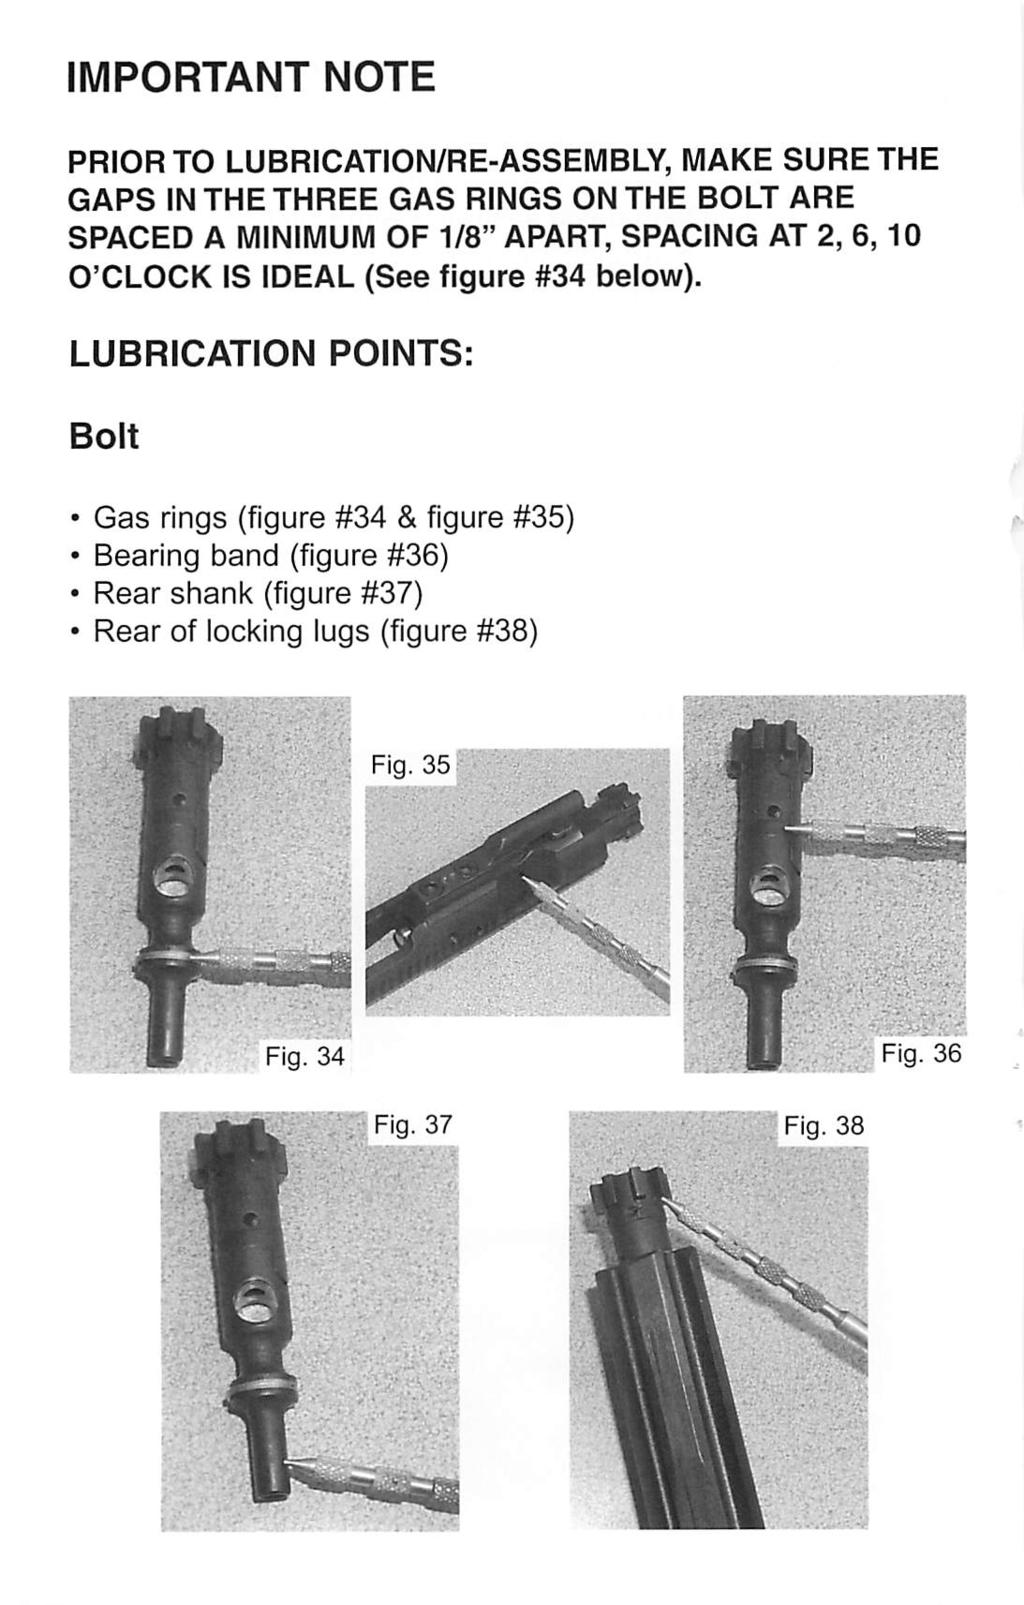 IMPORTANT NOTE PRIOR TO LUBRICATION/RE-ASSEMBLY, MAKE SURE THE GAPS IN THE THREE GAS RINGS ON THE BOLT ARE SPACED A MINIMUM OF 1/8" APART, SPACING AT 2, 6,10 O'CLOCK IS IDEAL (See